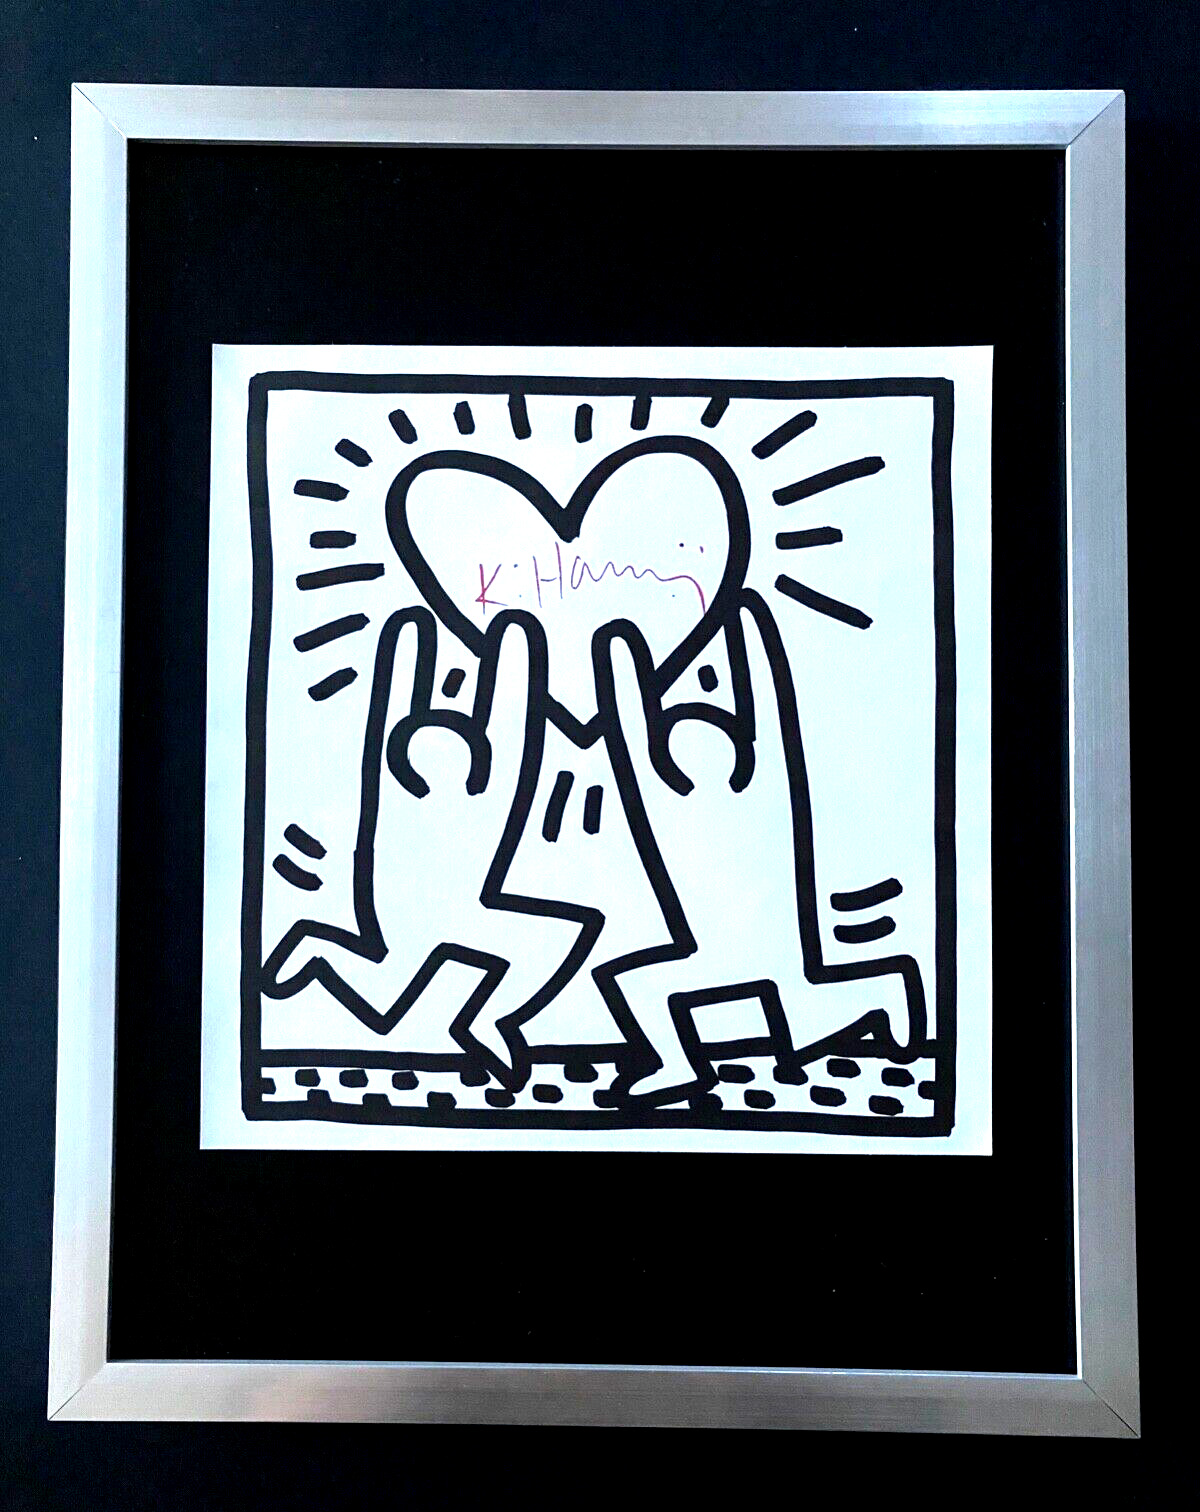 KEITH HARING + SIGNED VINTAGE PRINT FRAMED + BUY IT NOW